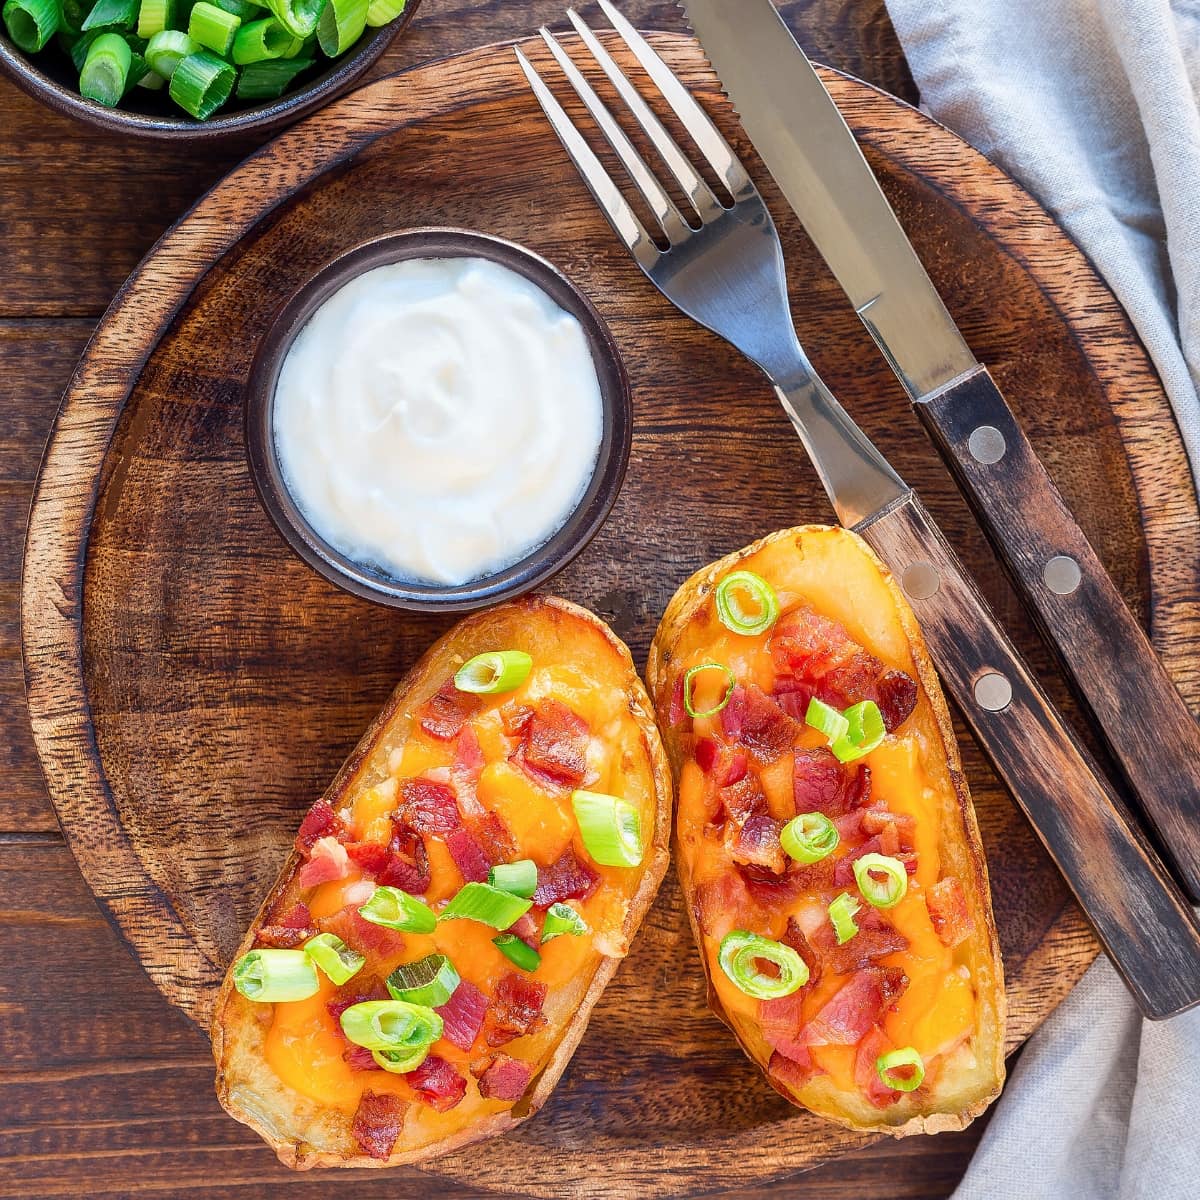 Potato skins served with sour cream garnished with chopped onions and bacon.